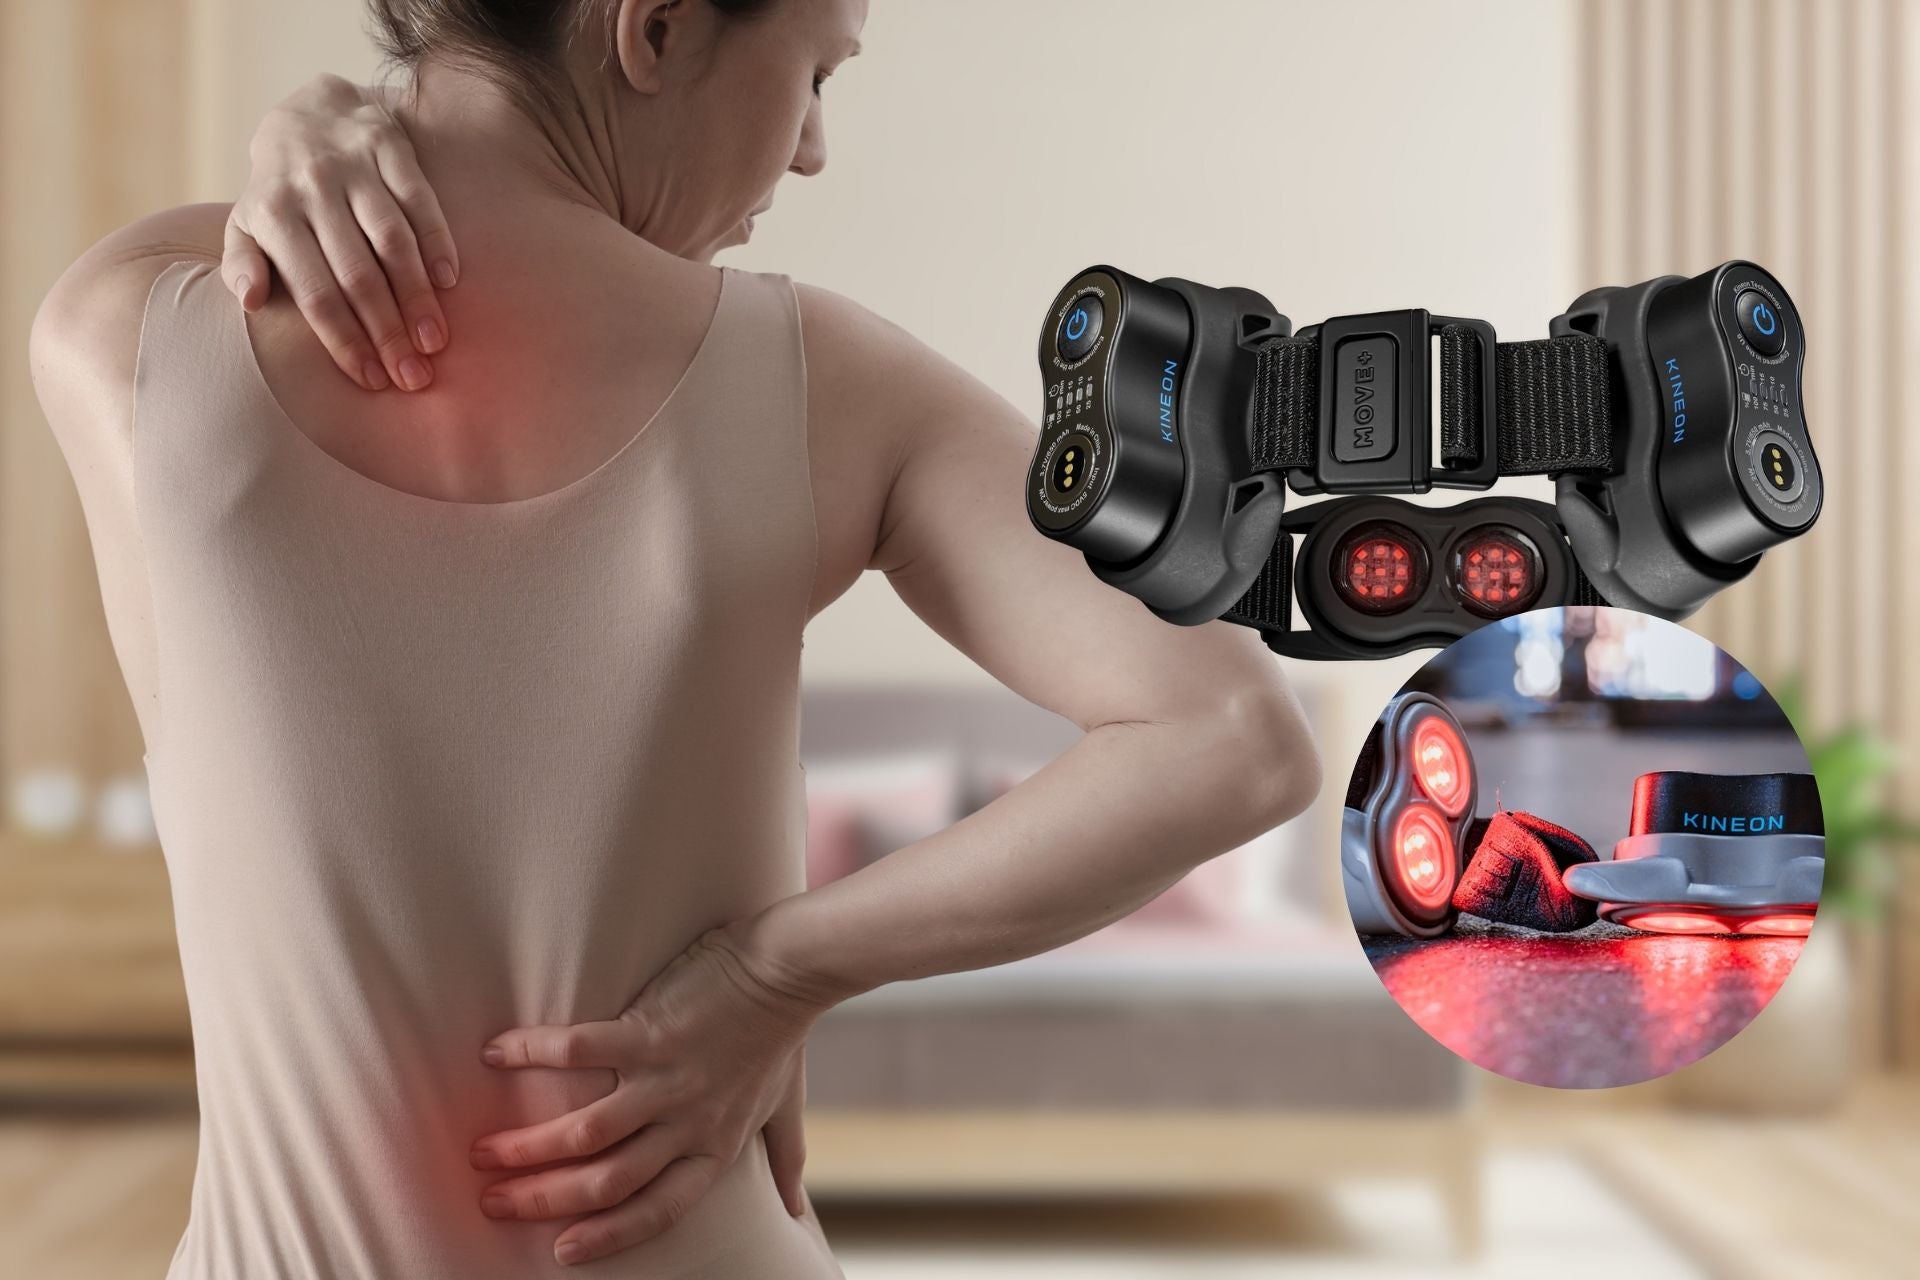 An image of a woman with back pain and on the side are red light therapy devices used to help alleviate back pain.